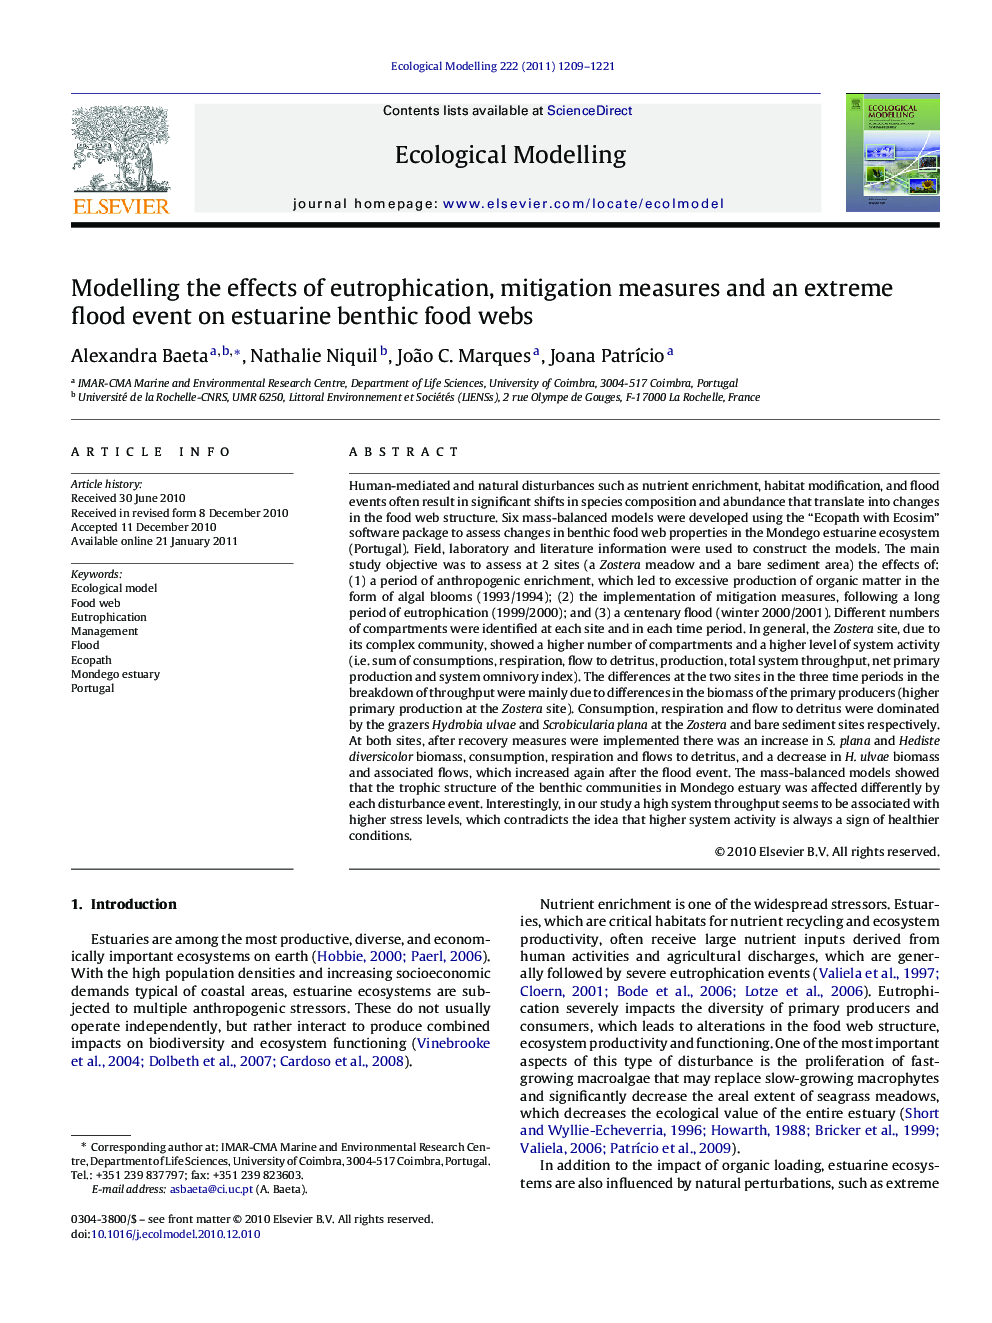 Modelling the effects of eutrophication, mitigation measures and an extreme flood event on estuarine benthic food webs